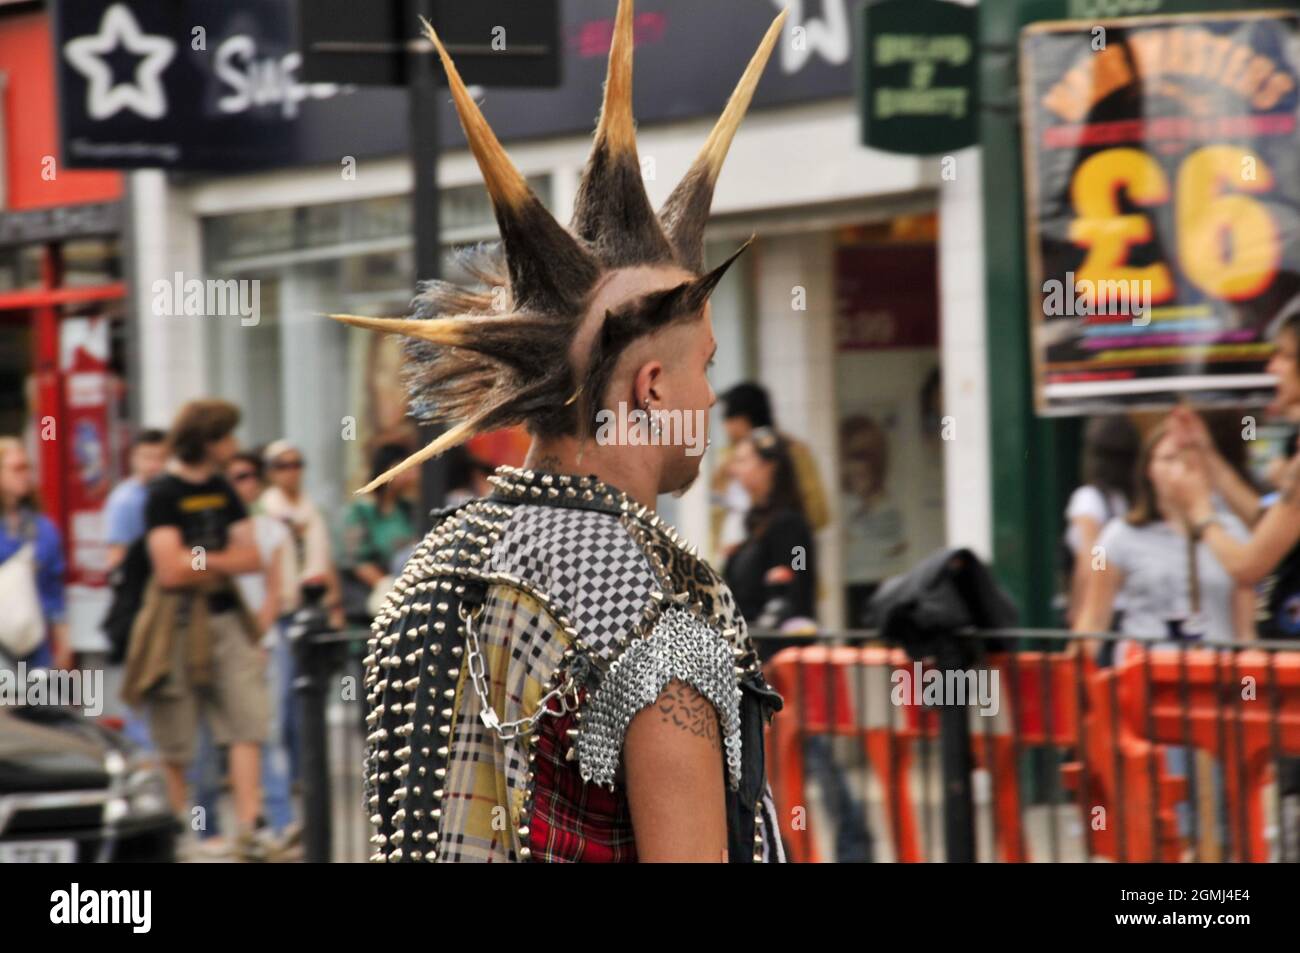 Young male with punk hair style in Camden Town, London, UK. Stock Photo